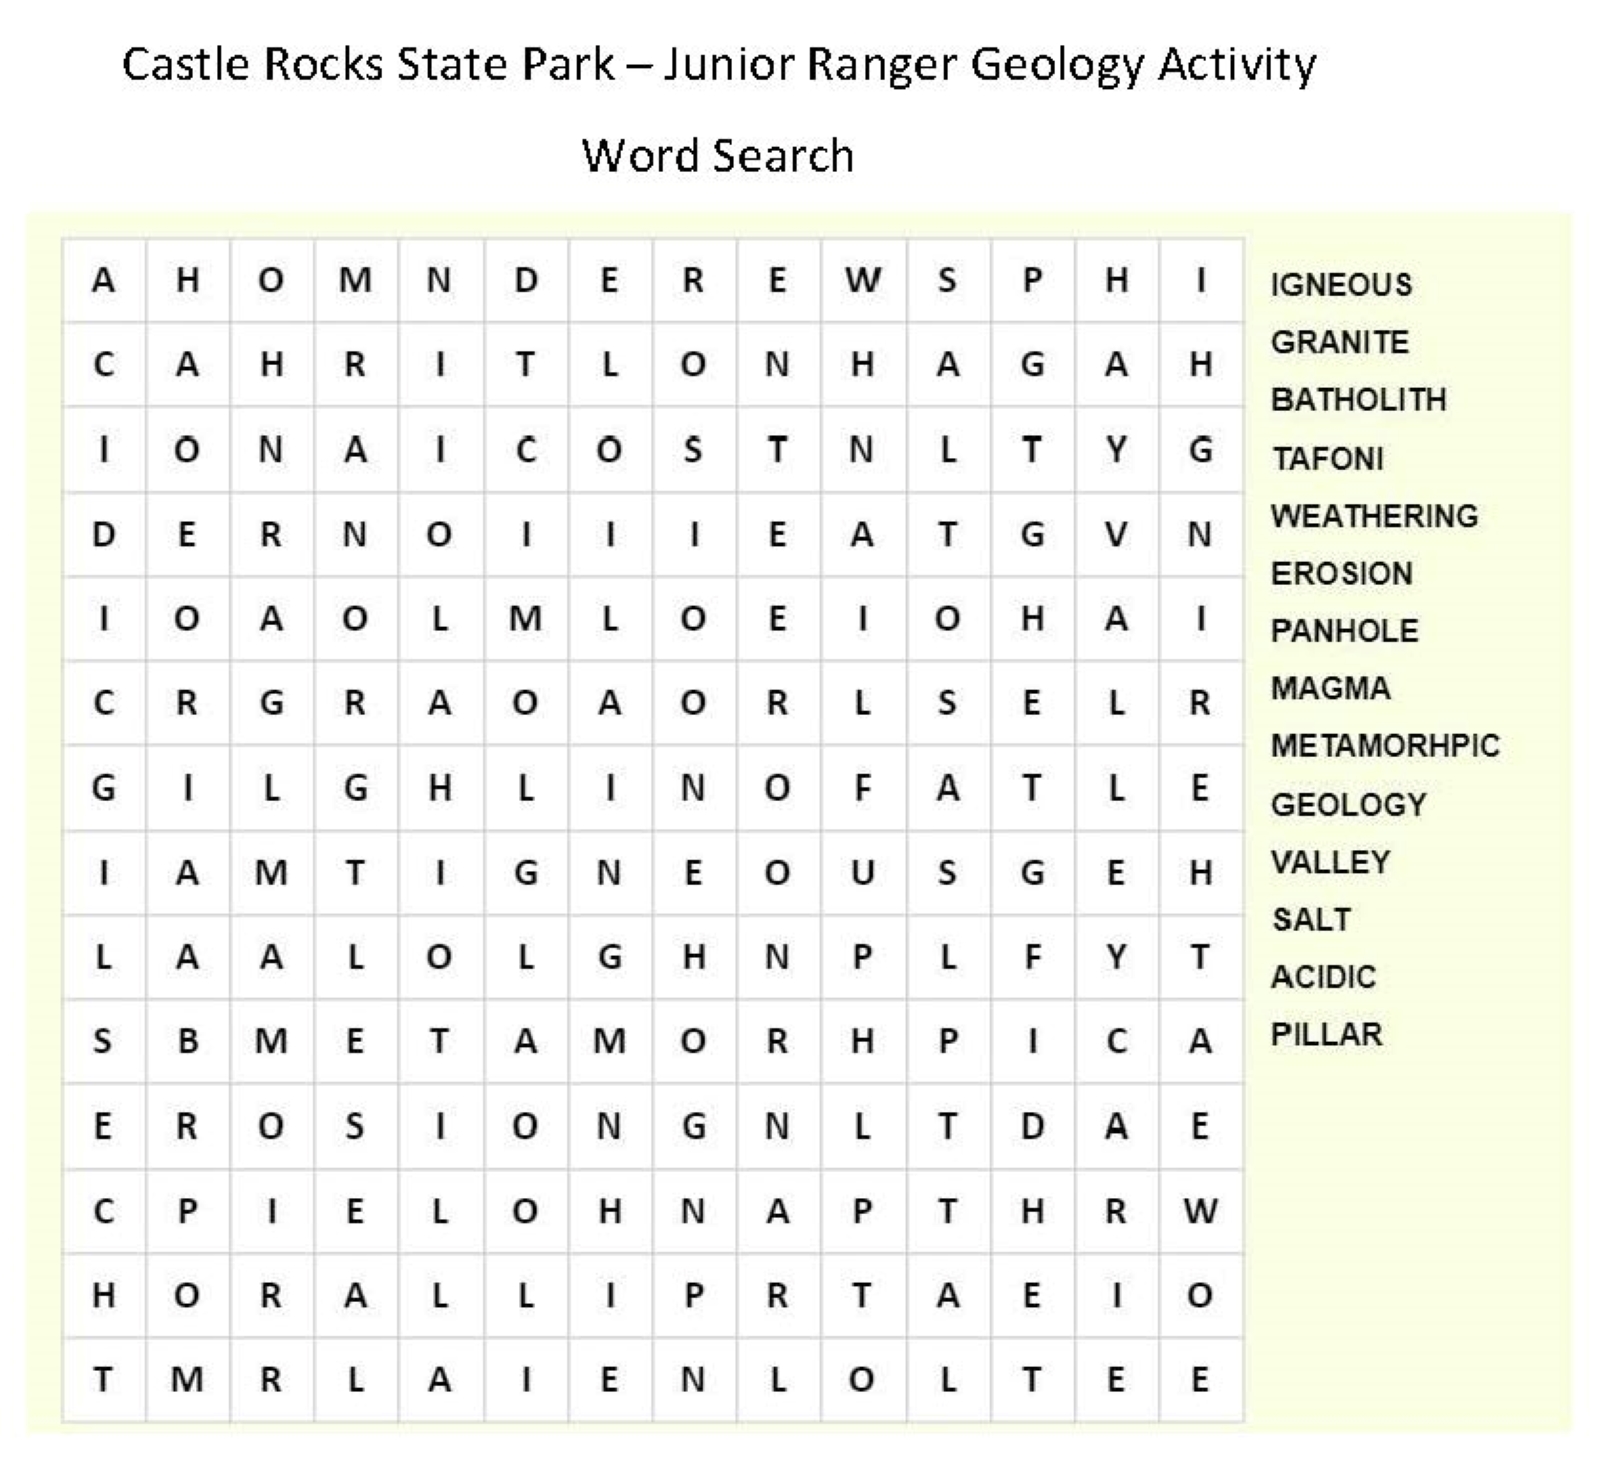 Geology Word Search (U.S. National Park Service)